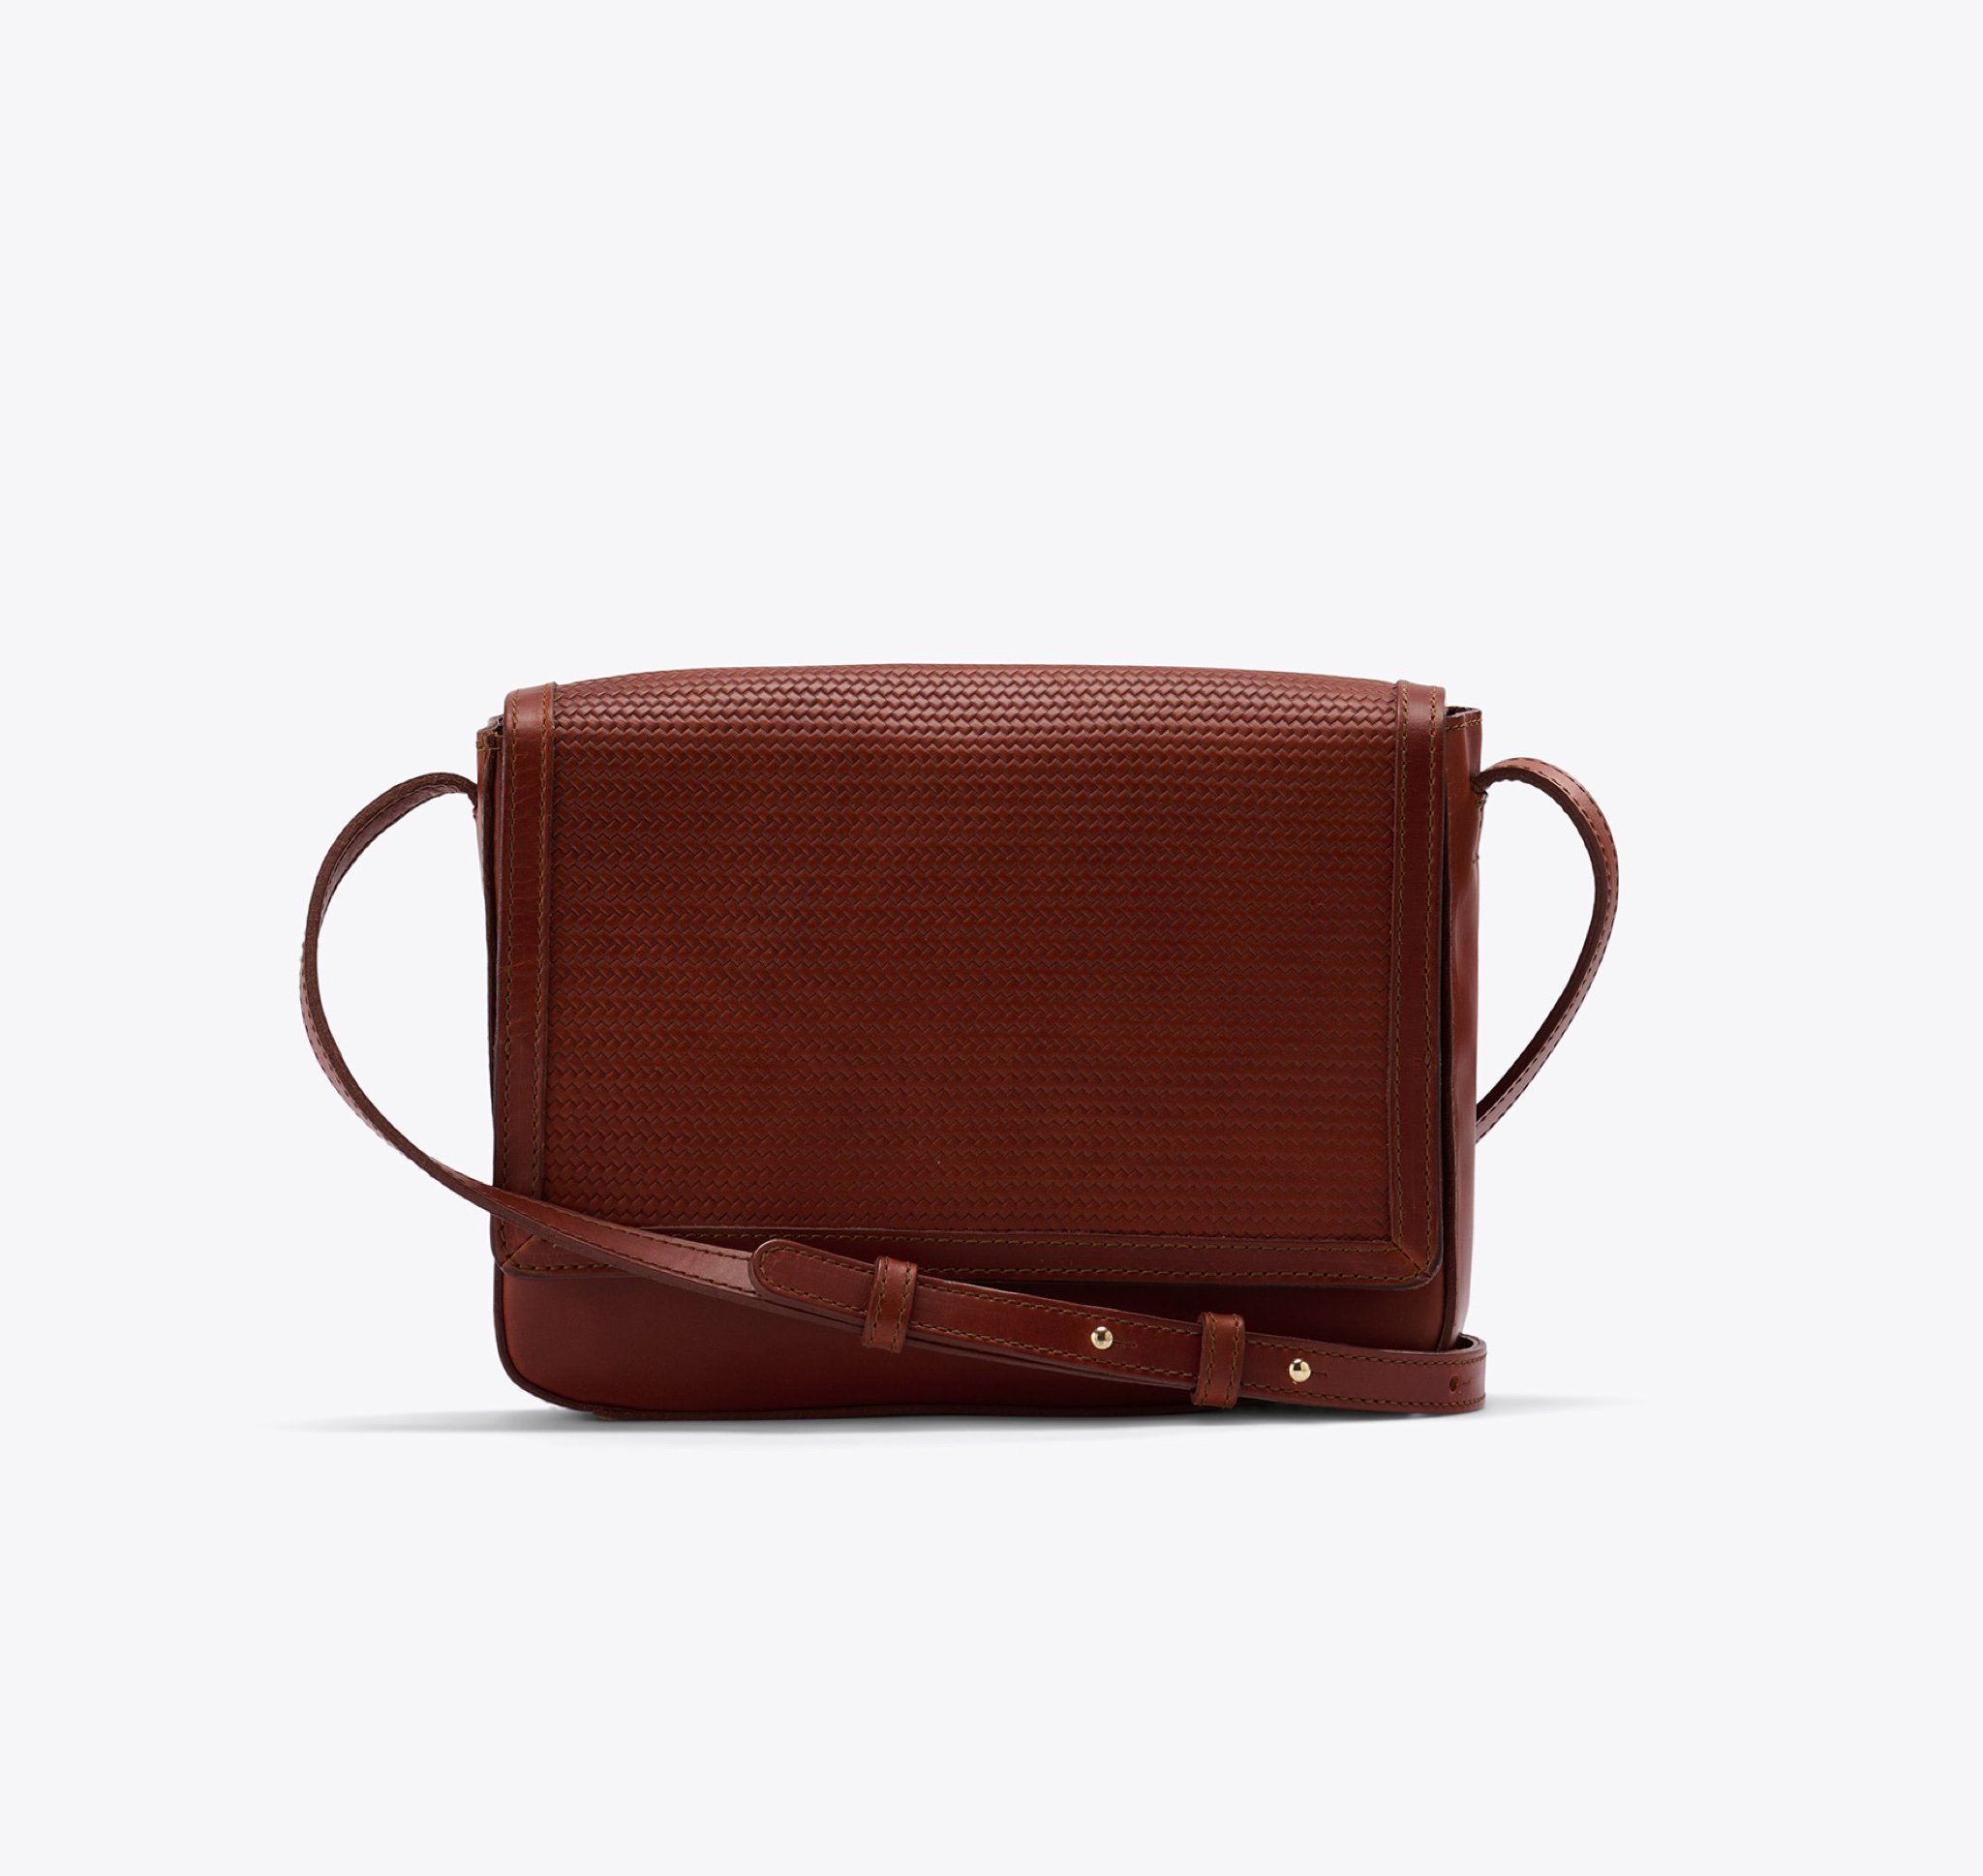 Nisolo Clara Crossbody Woven Brandy - Every Nisolo product is built on the foundation of comfort, function, and design. 